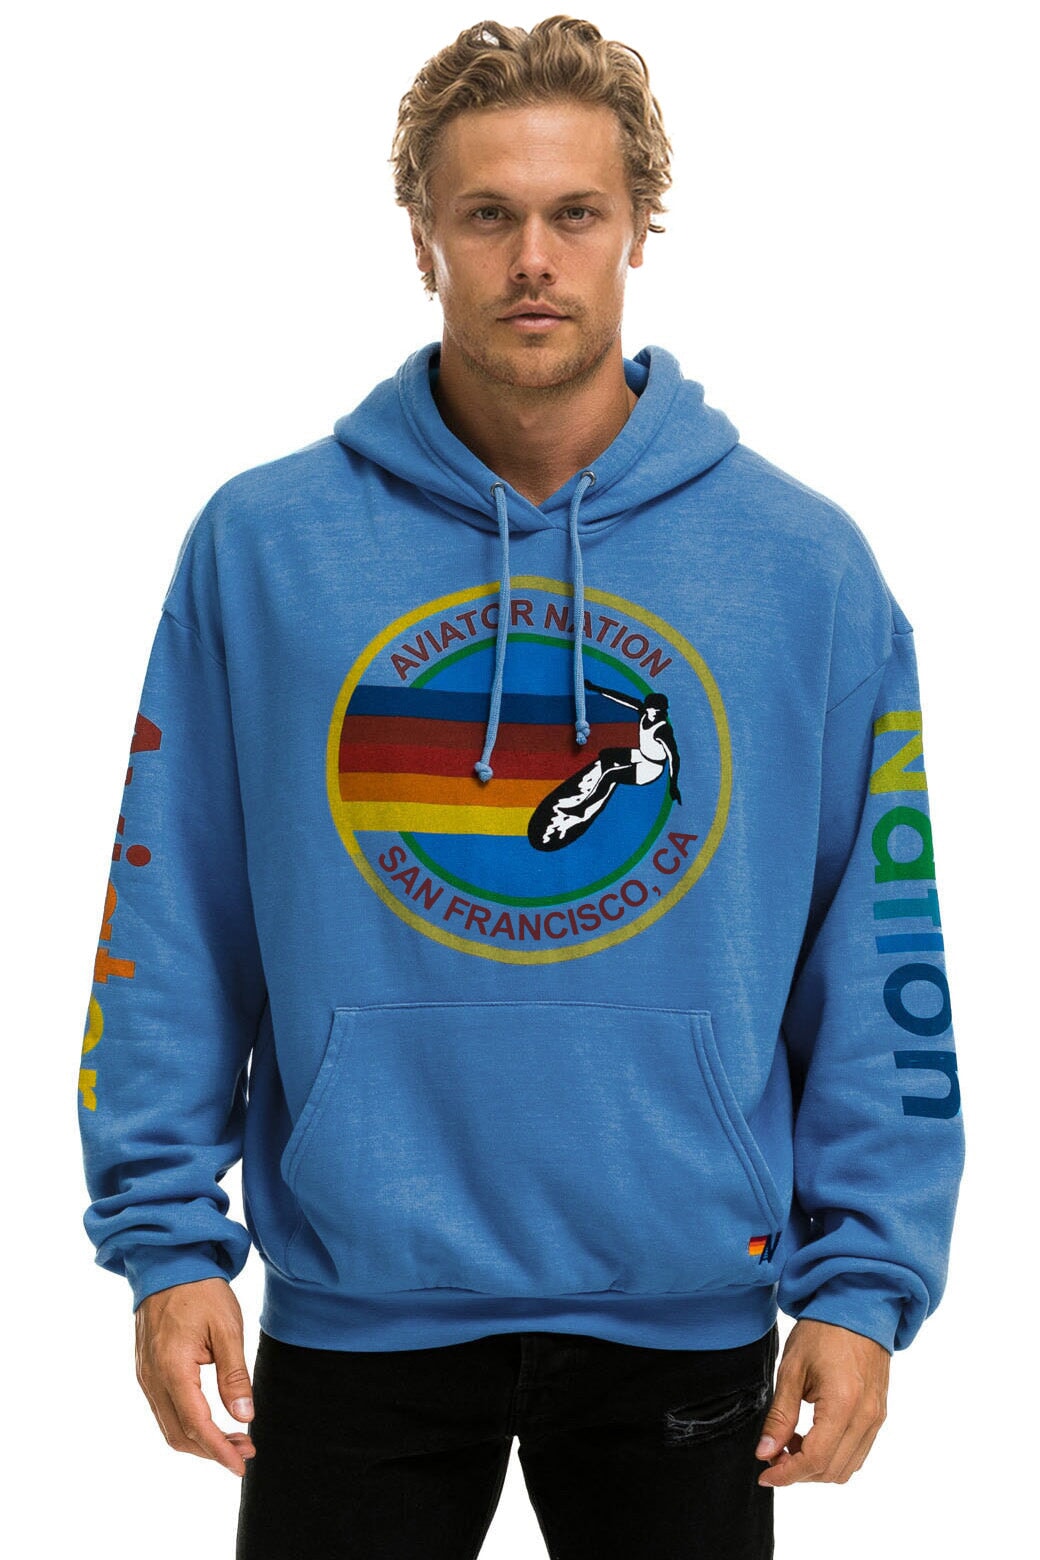 AVIATOR NATION SAN FRANCISCO RELAXED PULLOVER HOODIE - COBALT Hoodie Aviator Nation 